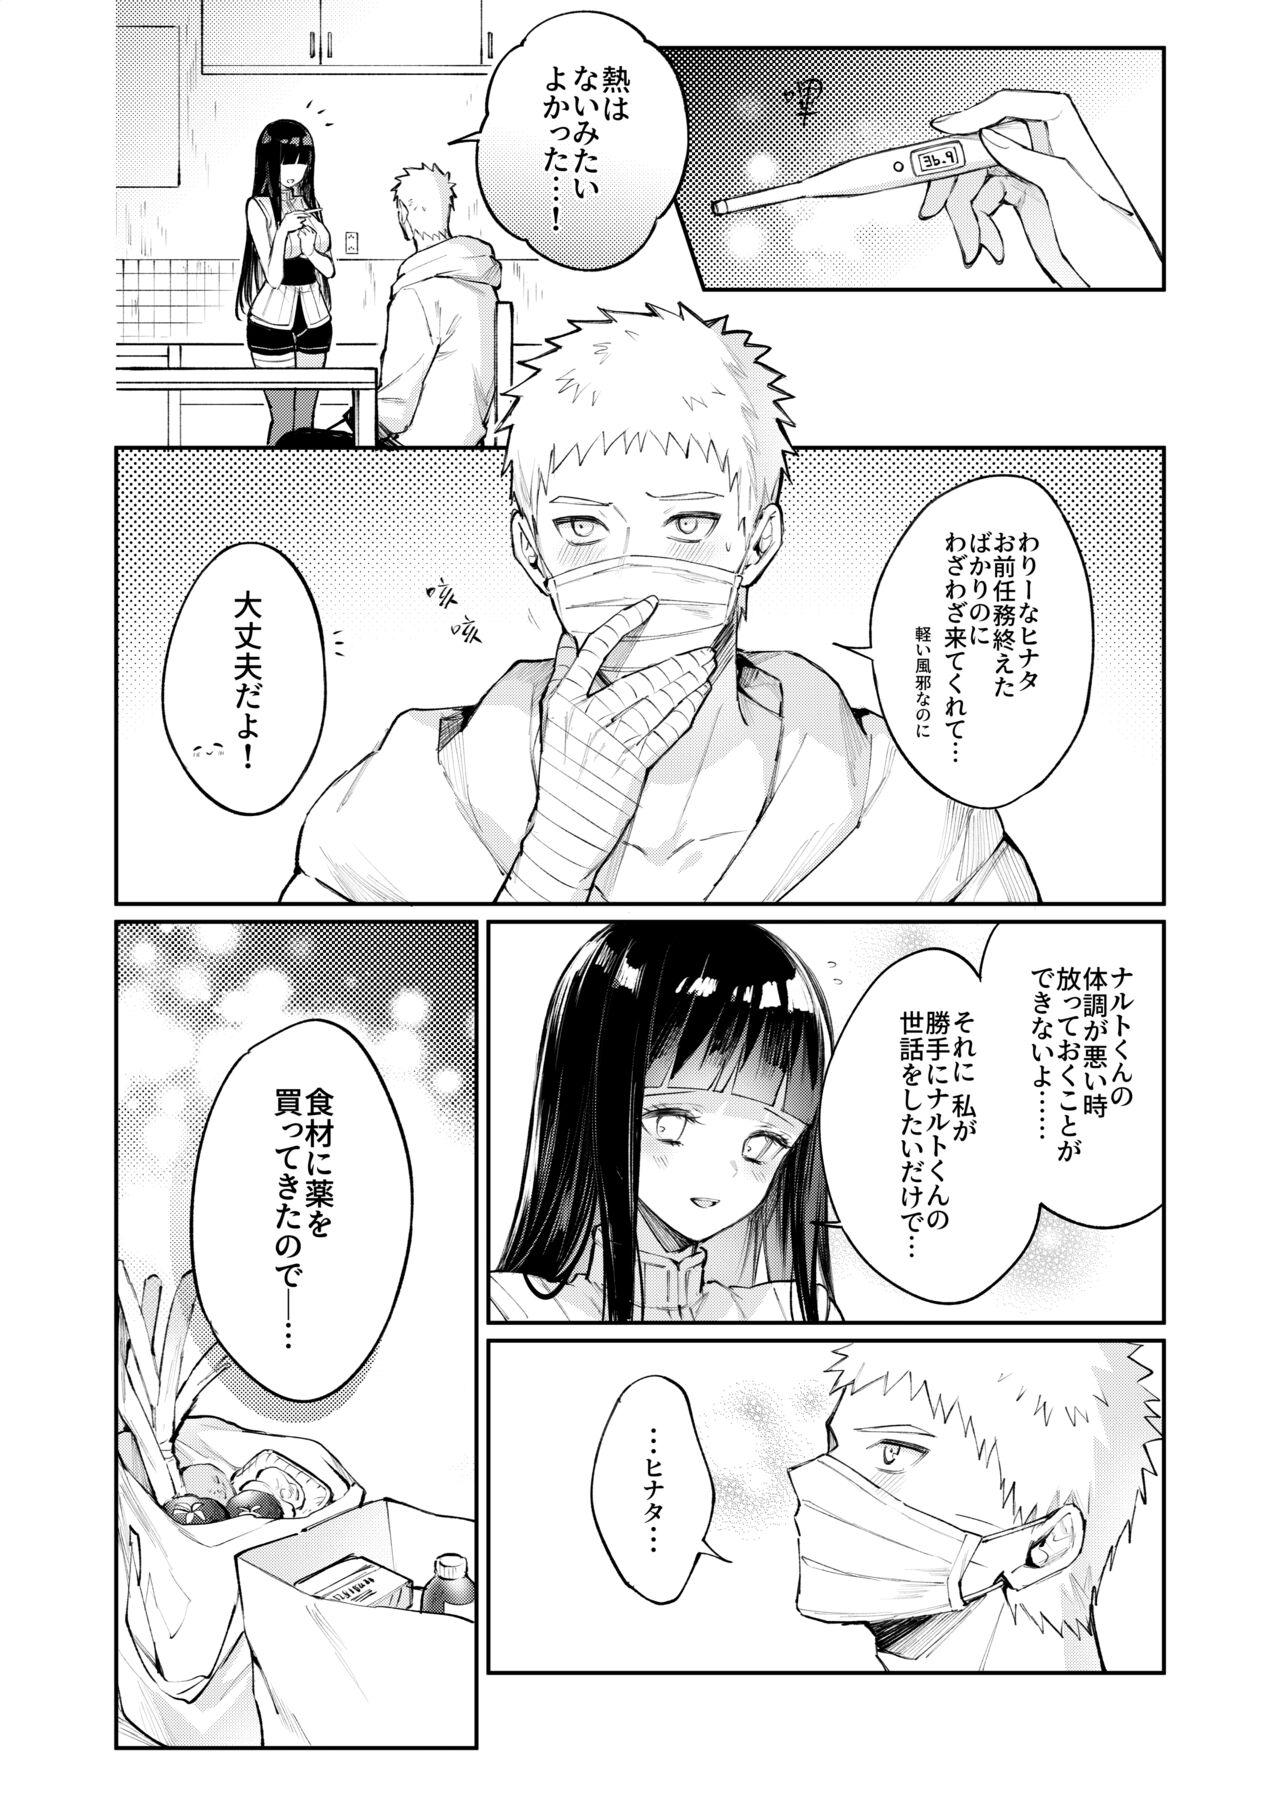 Dad 風邪 - Naruto 8teen - Picture 1